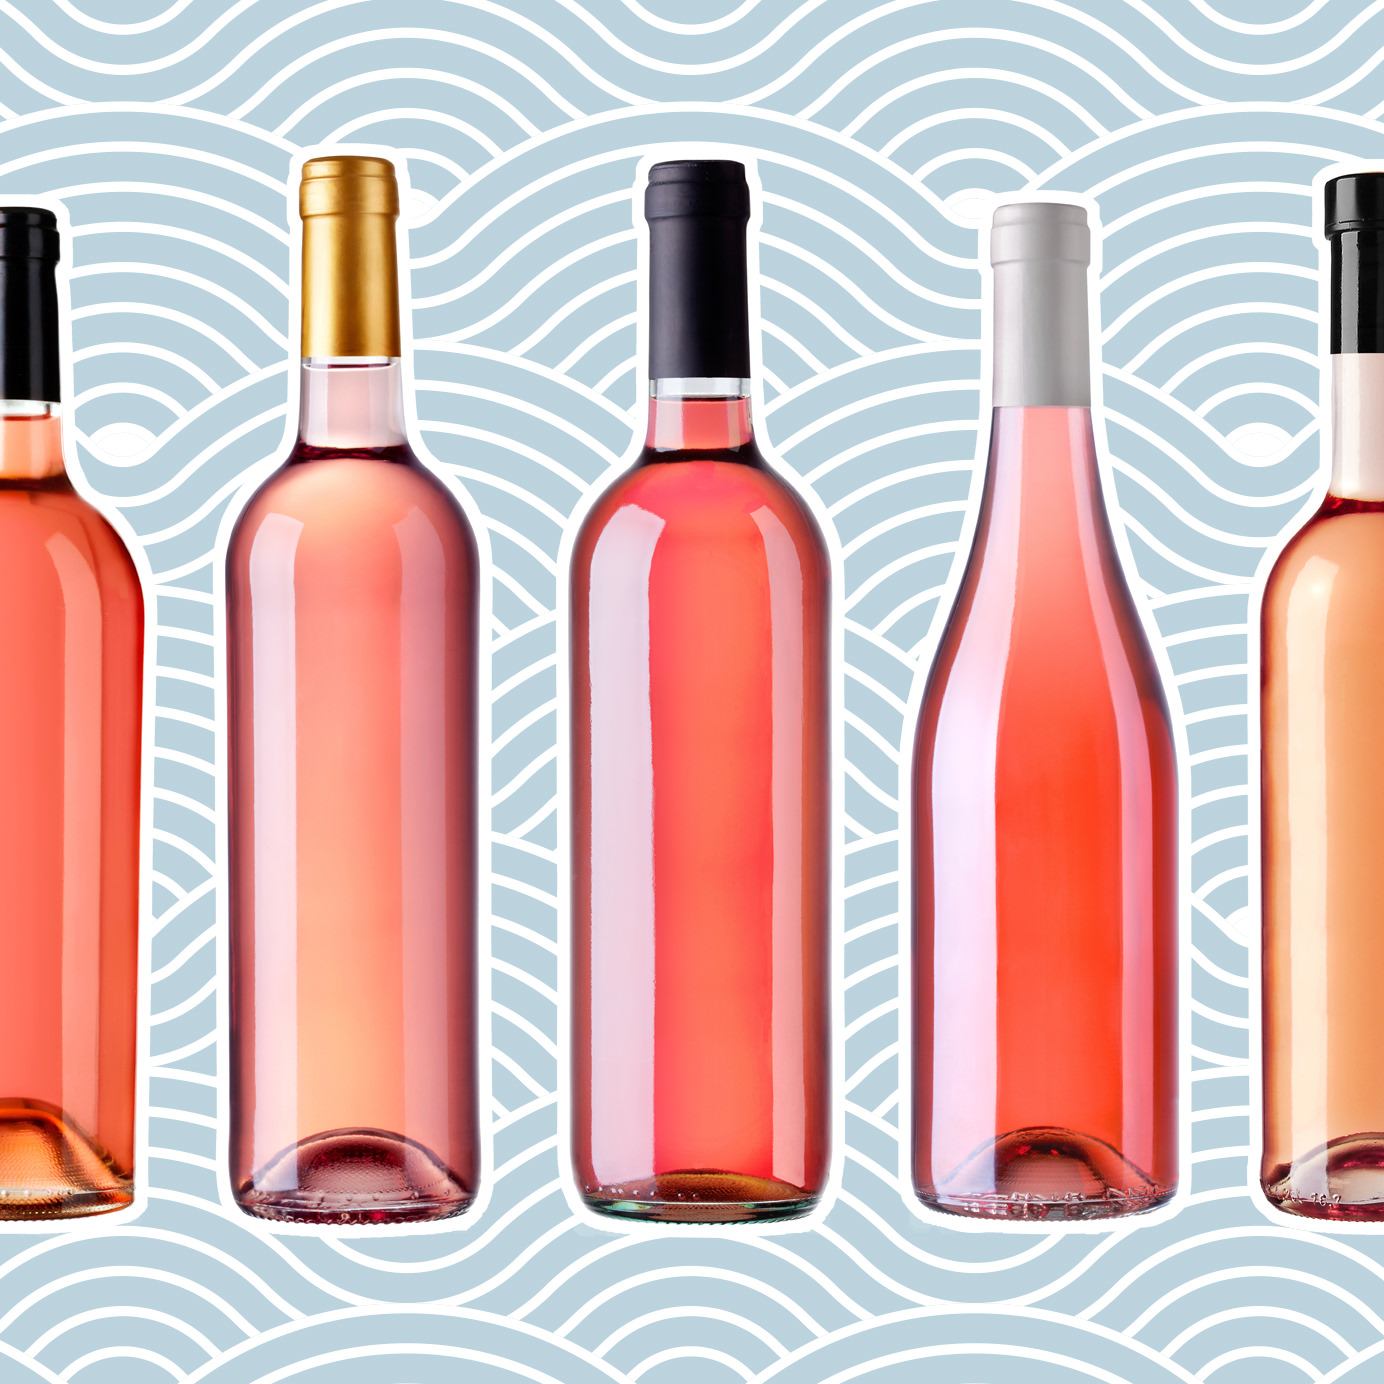 The 25 Best Rosé Wines of 2018